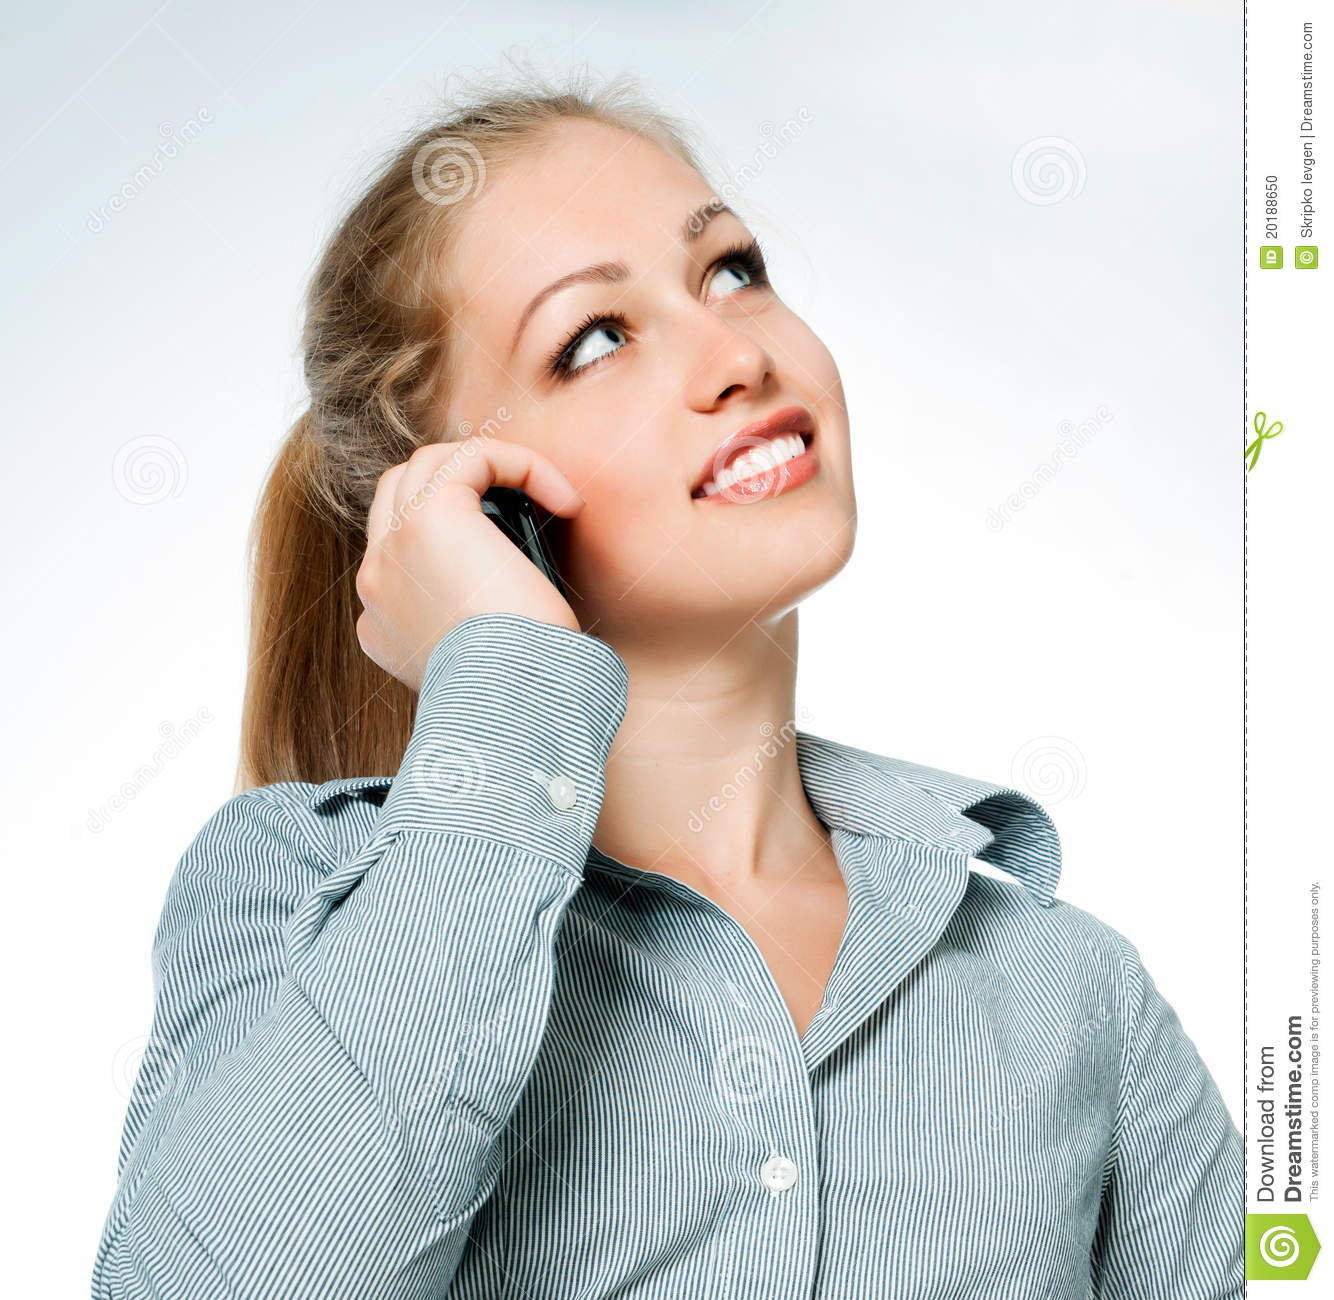 Business Lady On The Phone Calls Stock Photo   Image  20188650